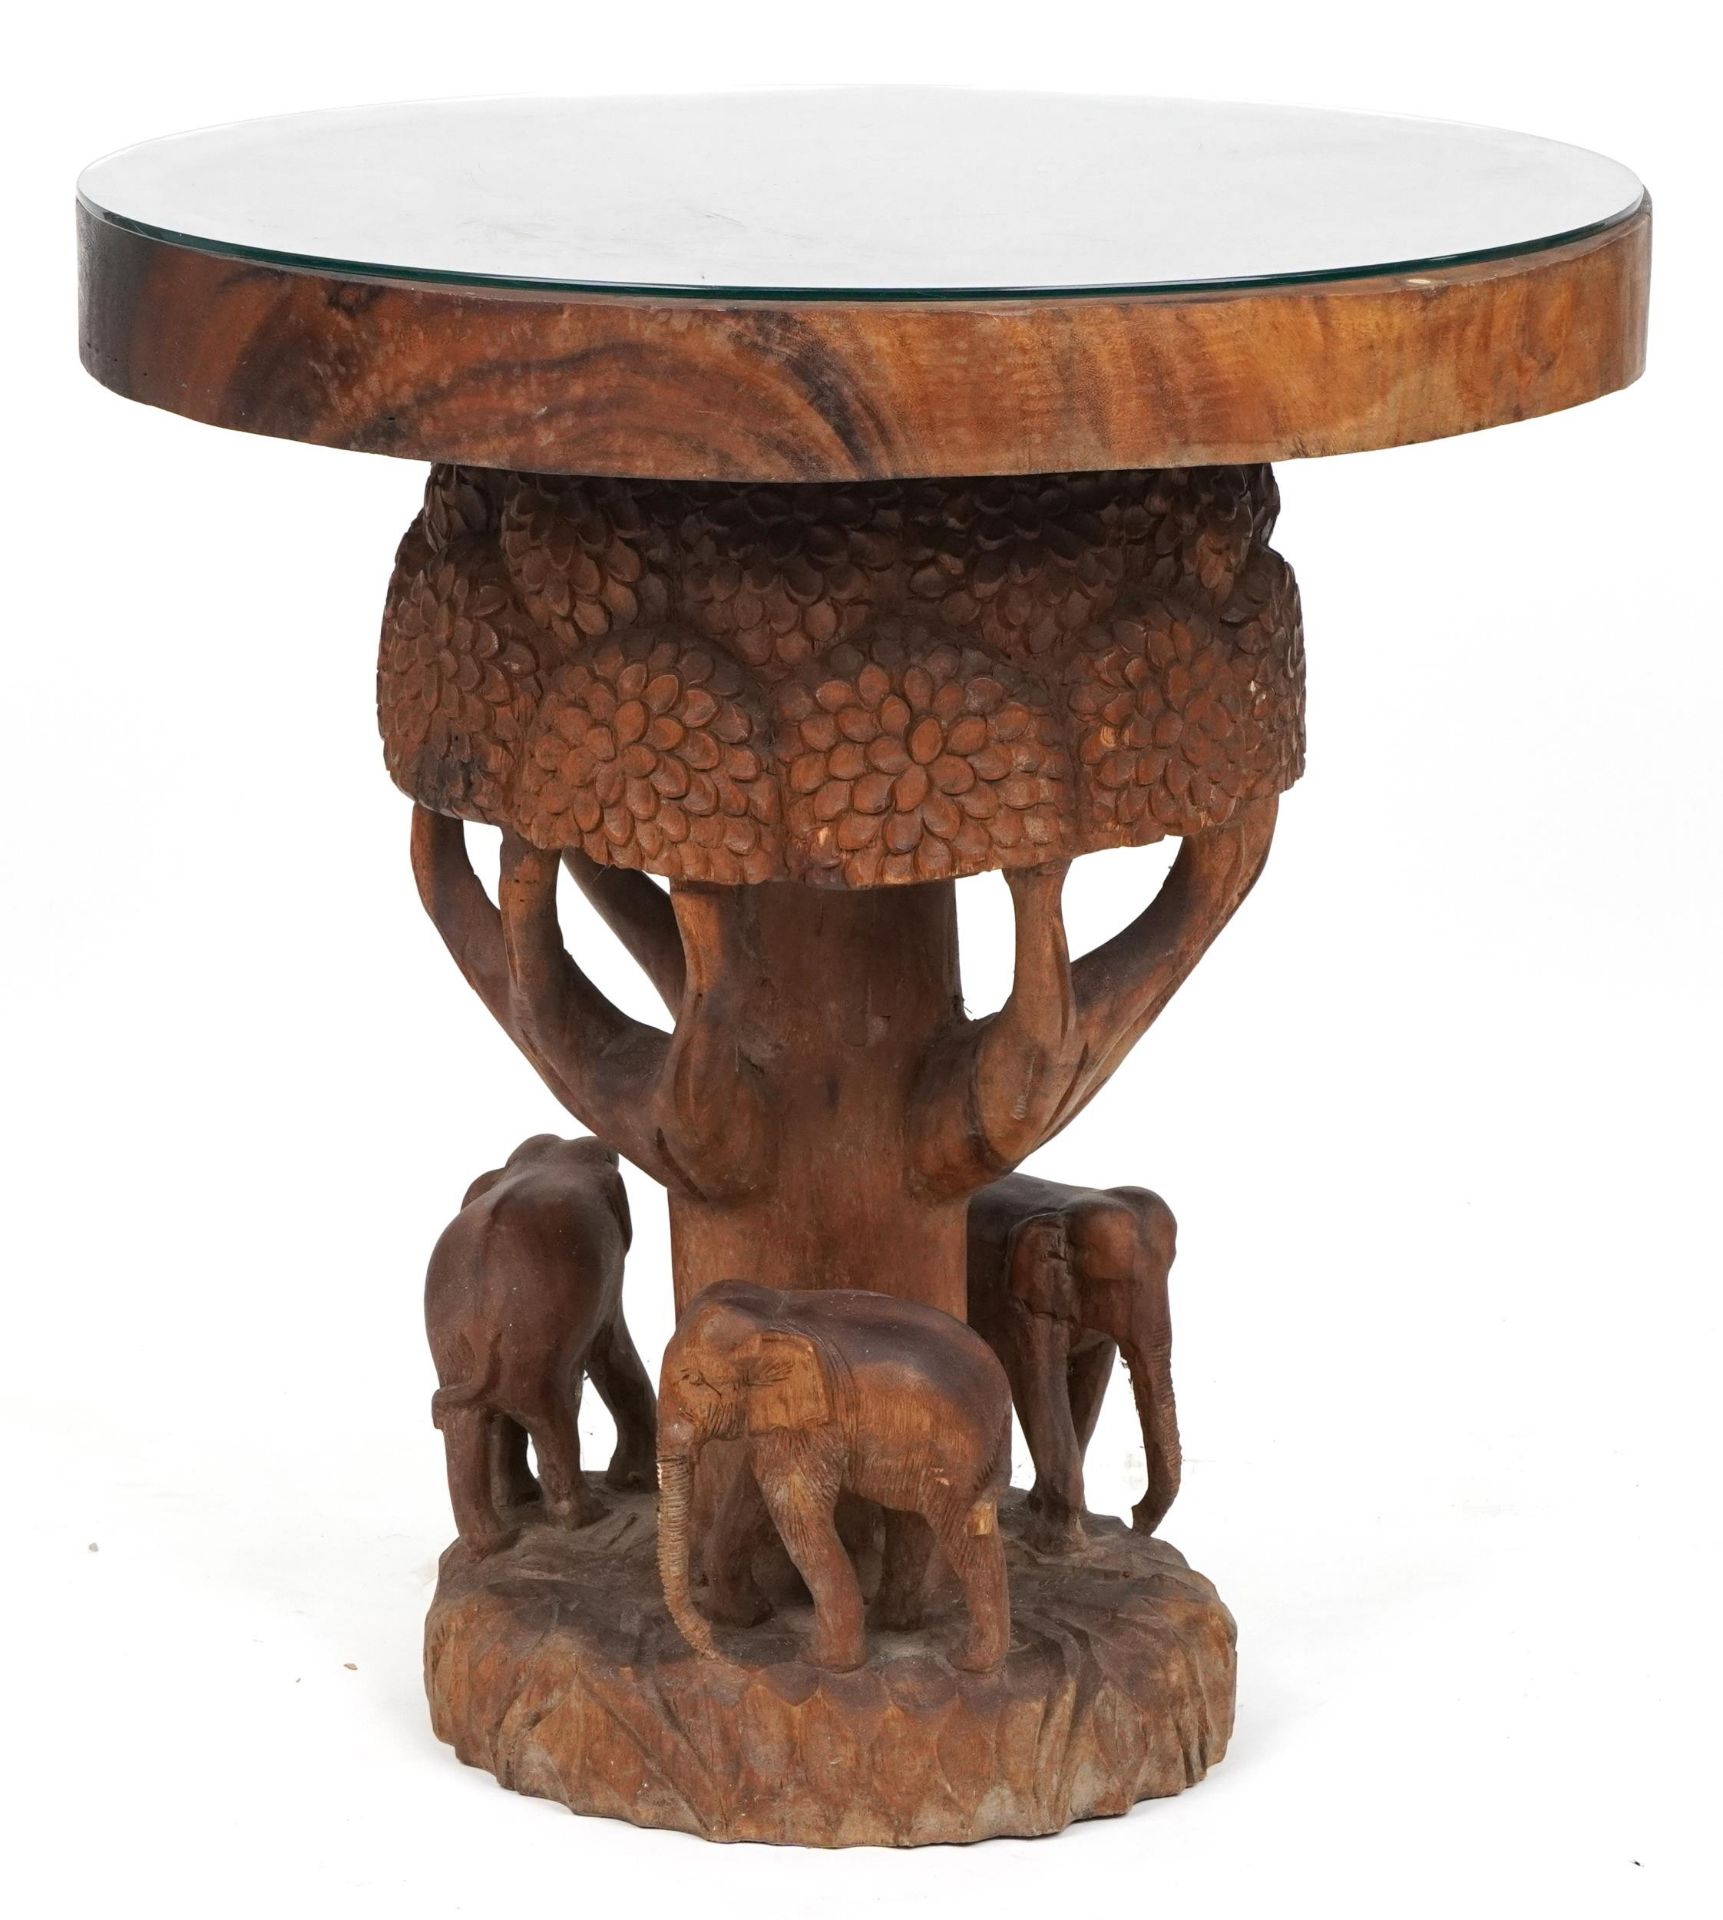 African circular centre table profusely carved with elephants and trees, 80cm high x 75cm in